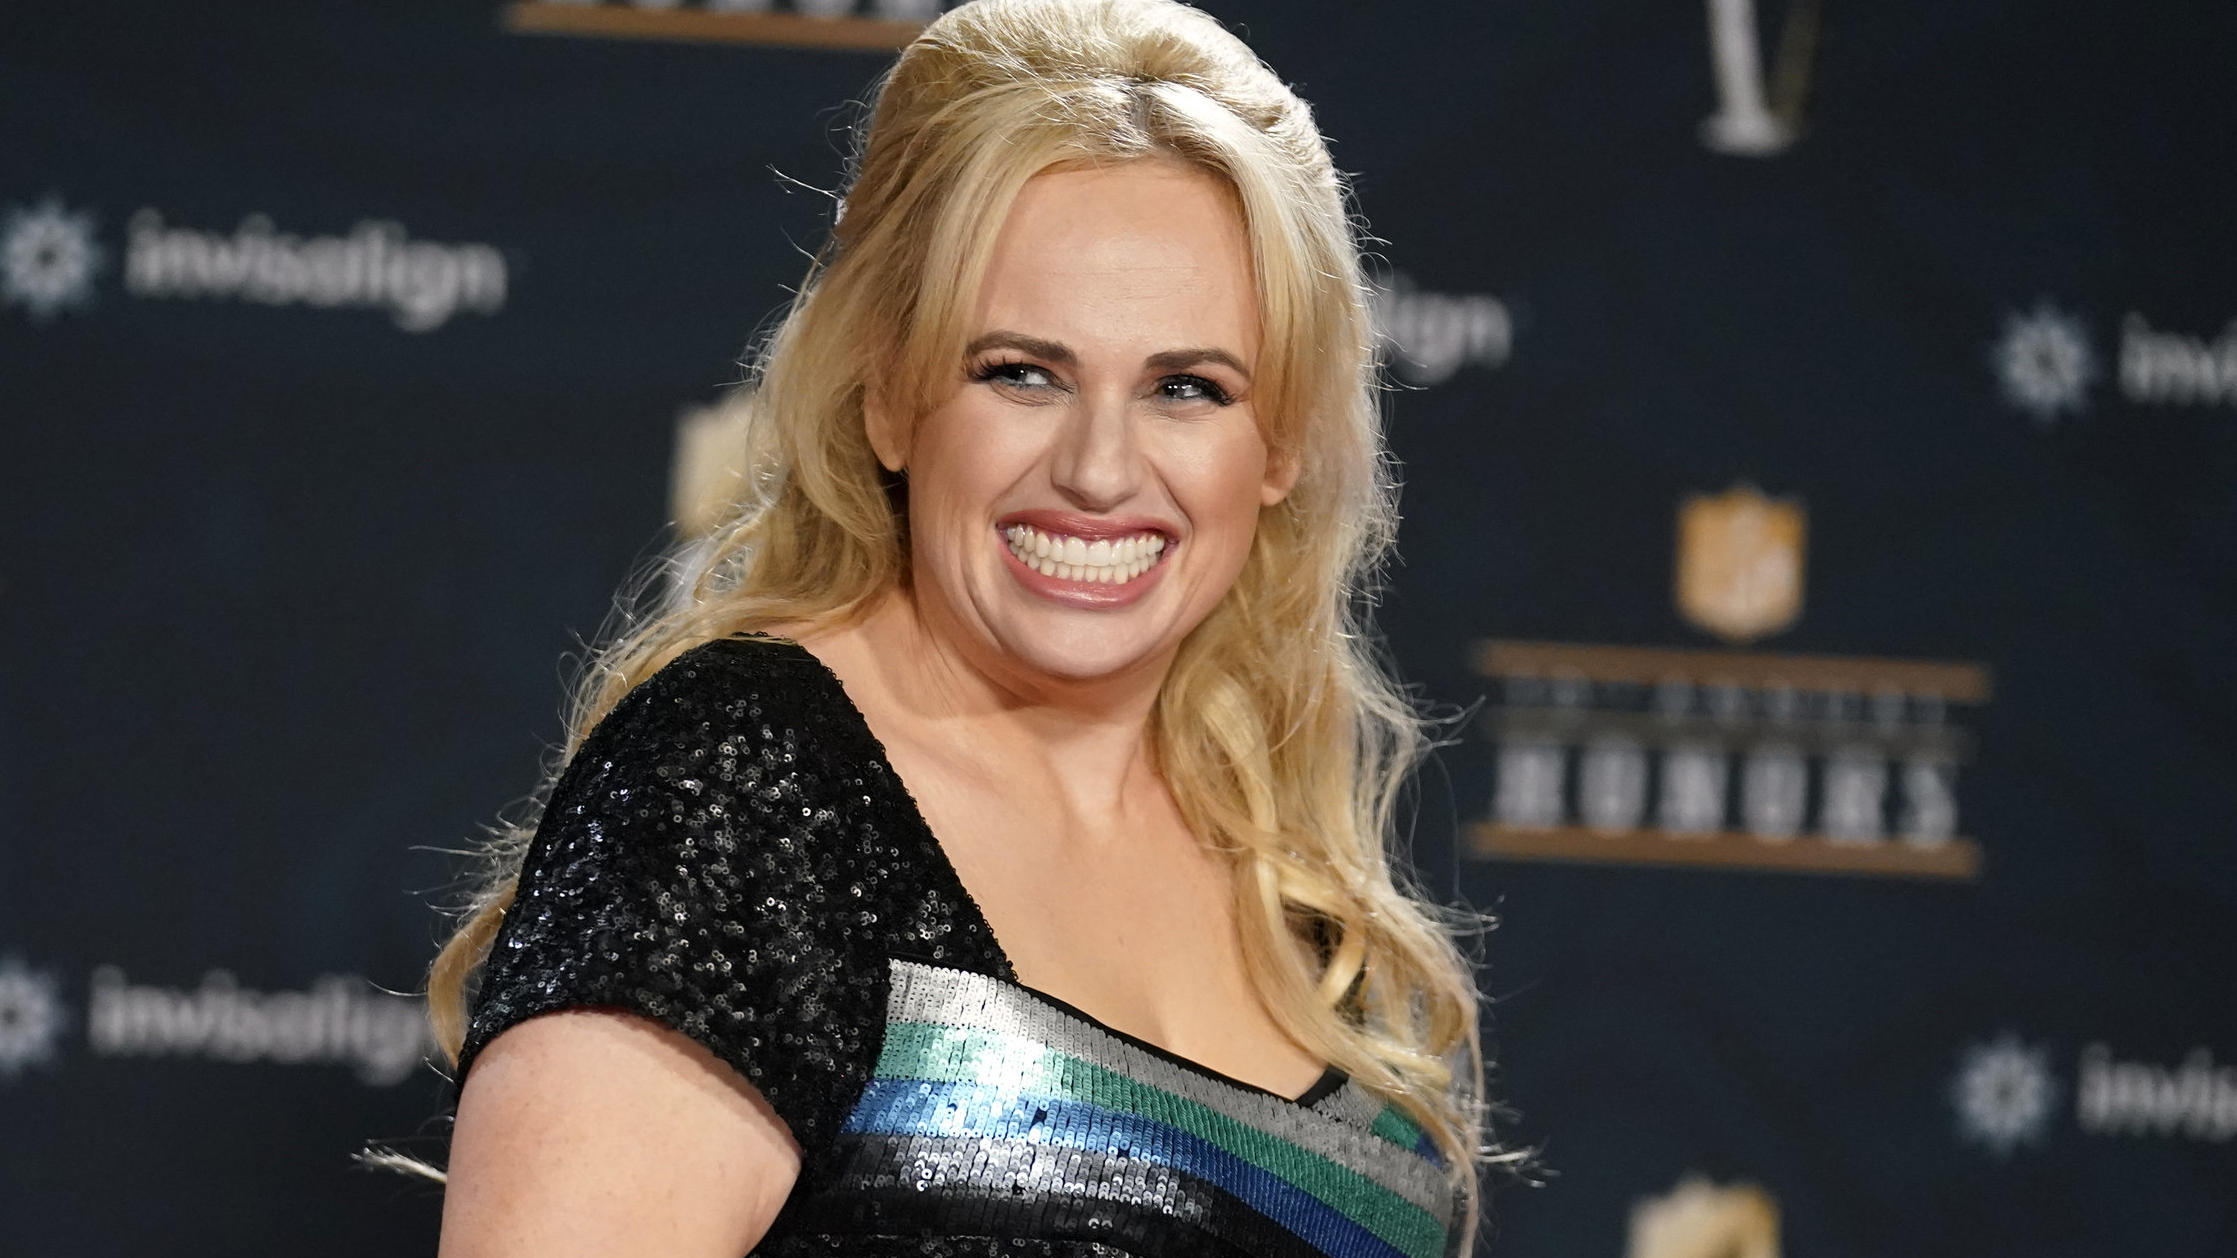 FILE - In this Tuesday, Feb. 2, 2021, file photo, Rebel Wilson poses on the red carpet during the NFL Honors football awards show, in Los Angeles. Wilson returns to her roots as host of ABC's â€œPooch Perfect,â€ an eight-episode series featuring 10 